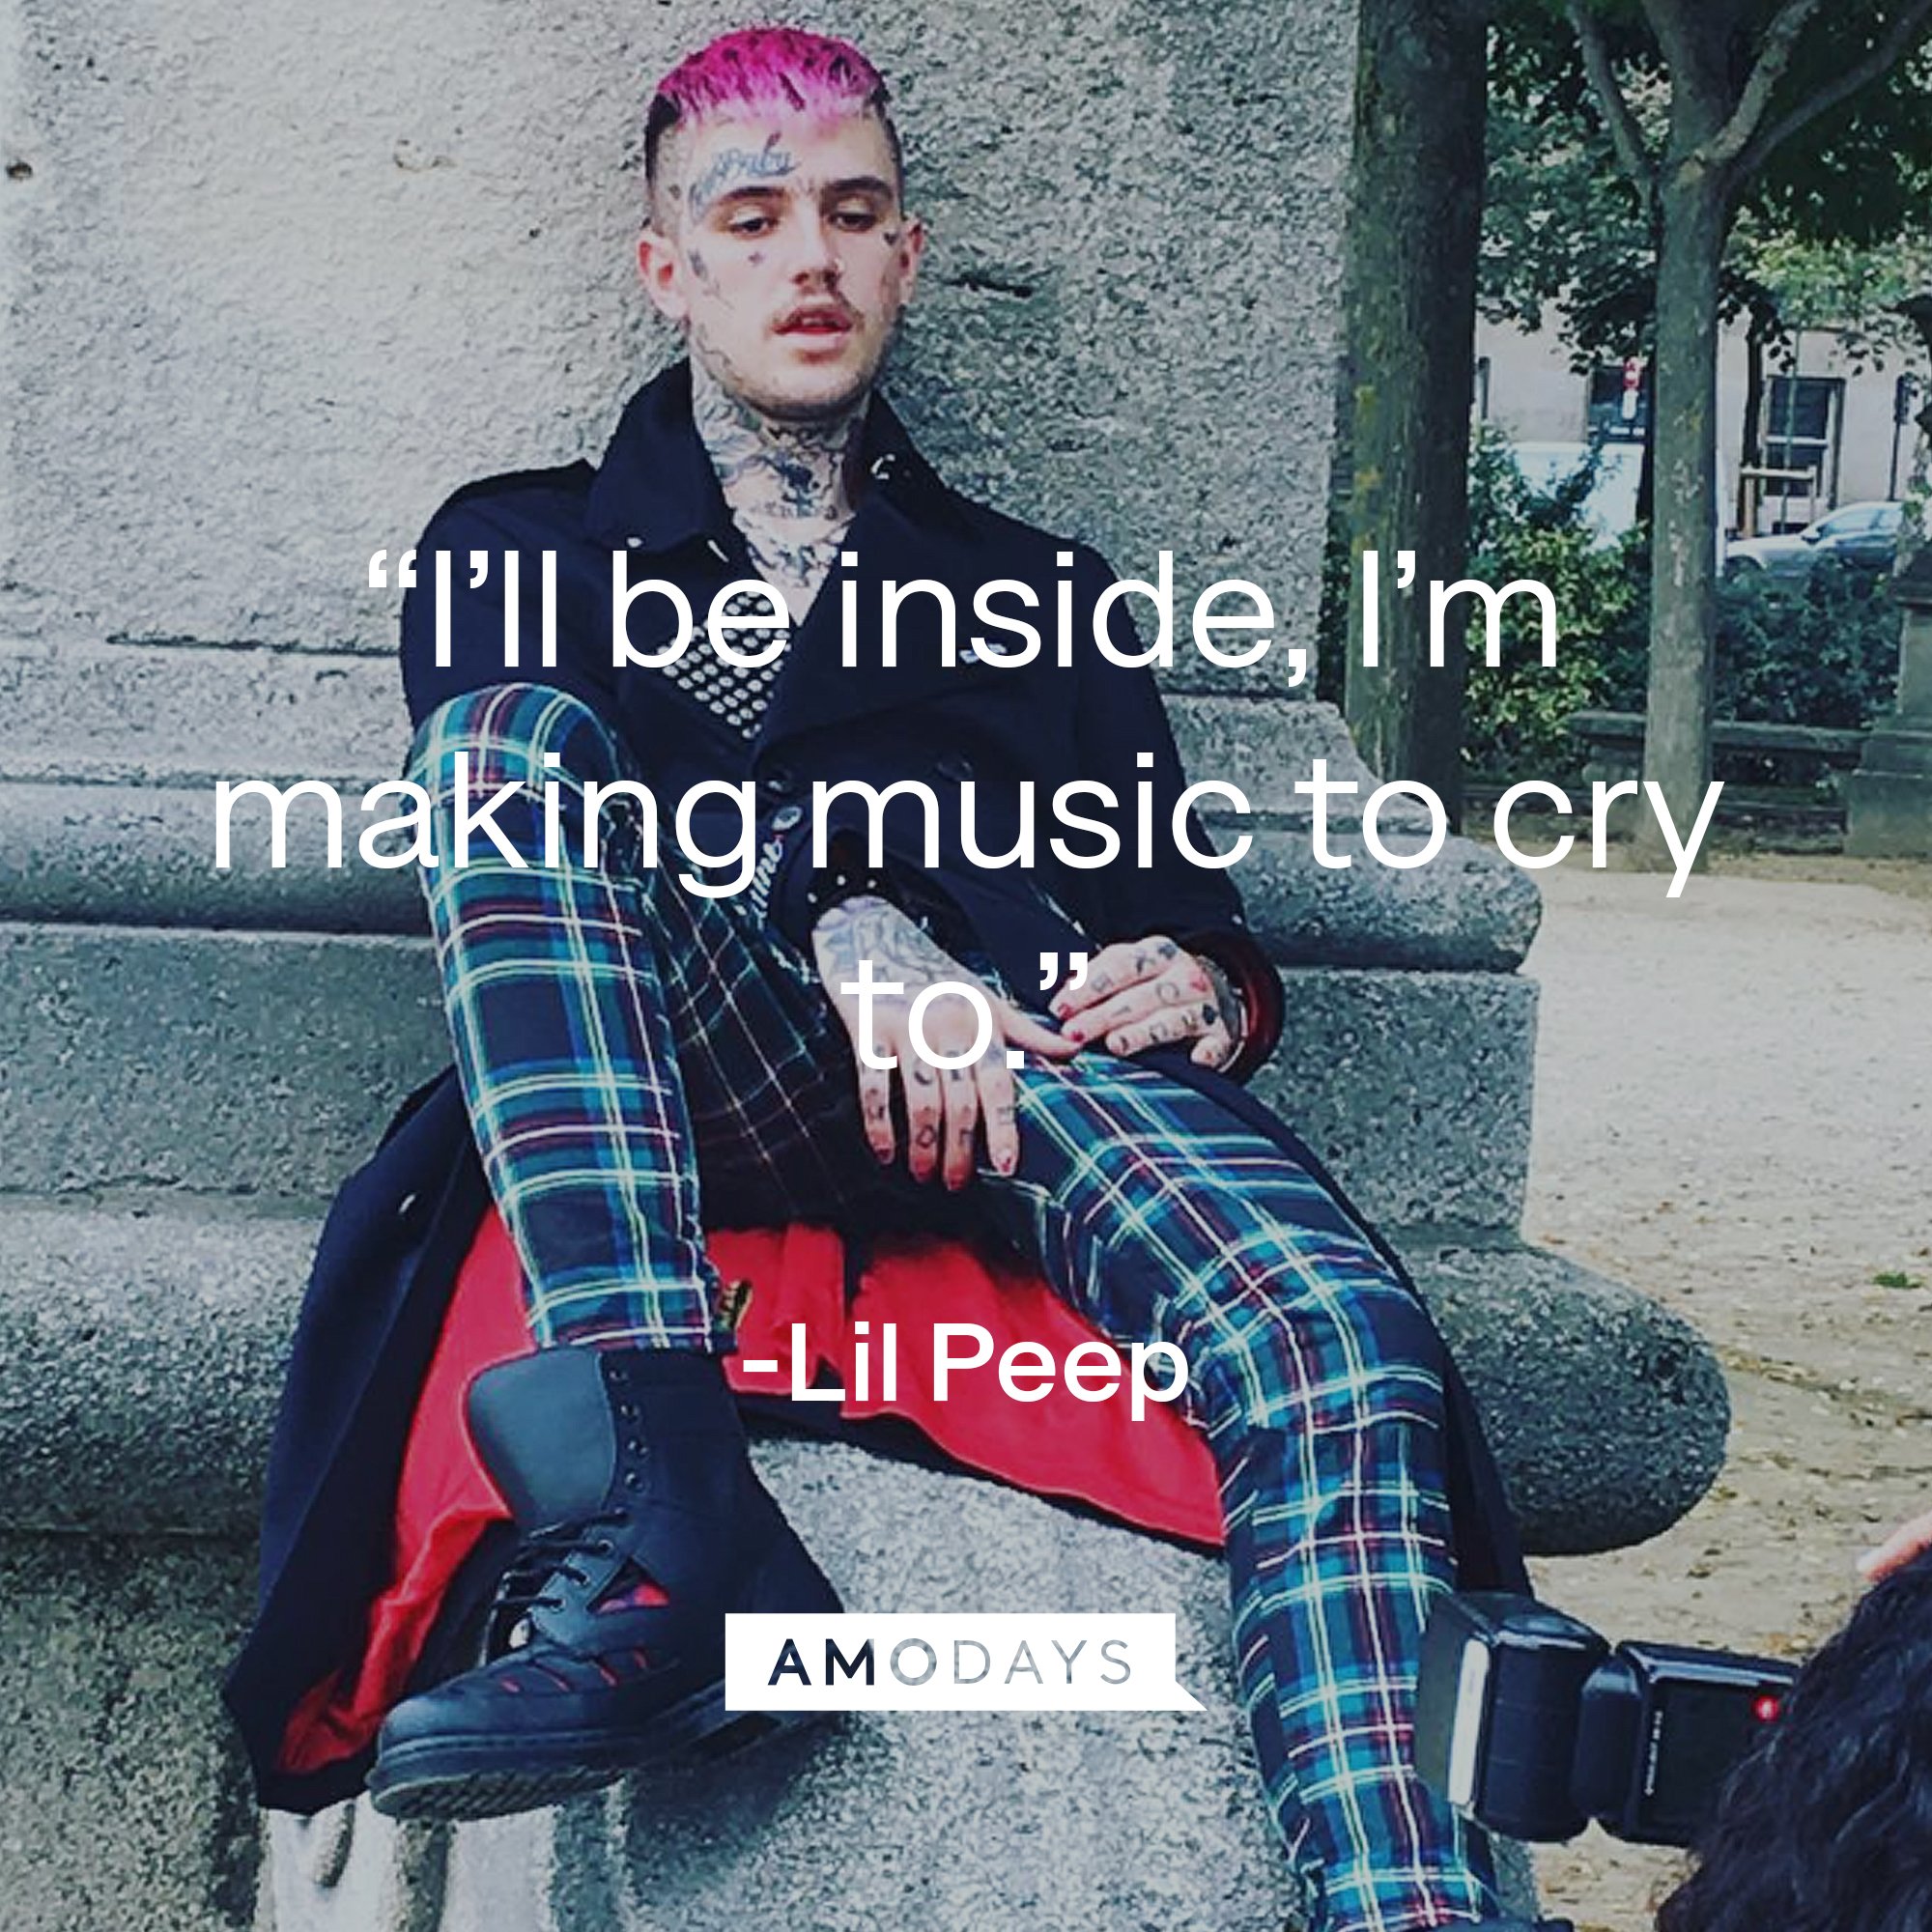 Lil Peep's quote: “I’ll be inside, I’m making music to cry to” | Image: AmoDays